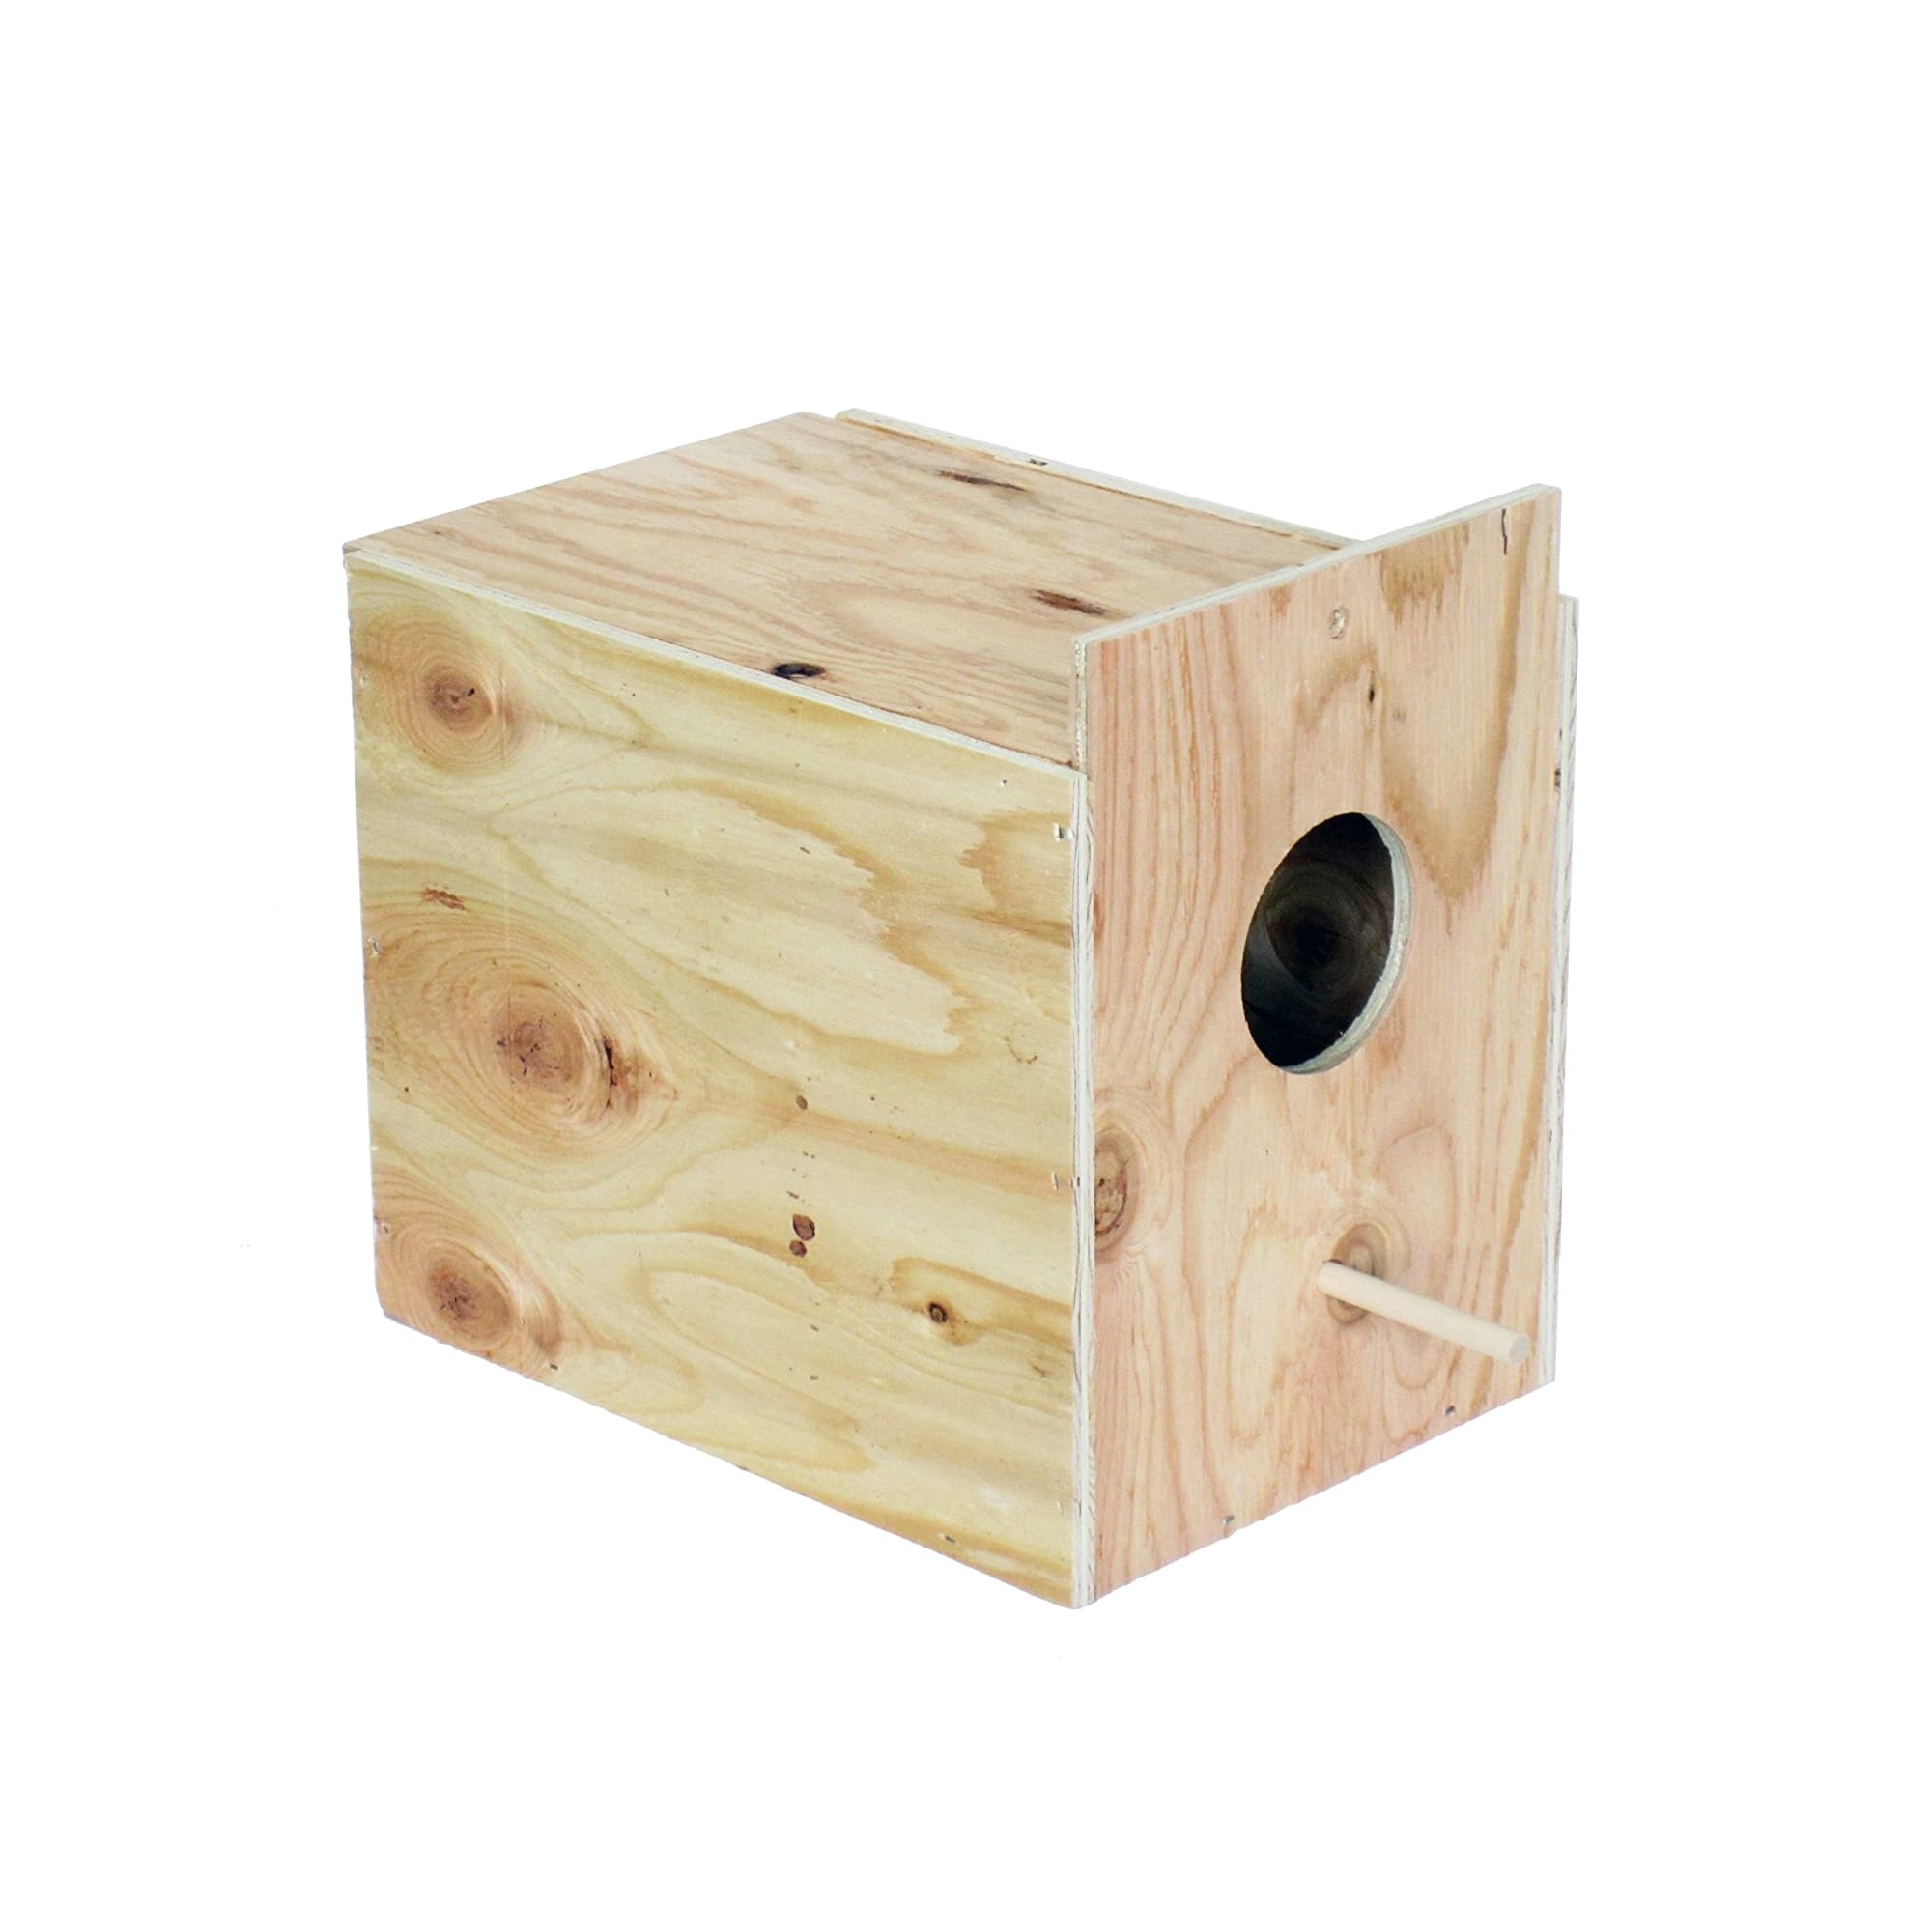 Yml Assembled Wooden Nest Box For, Wooden Nesting Boxes